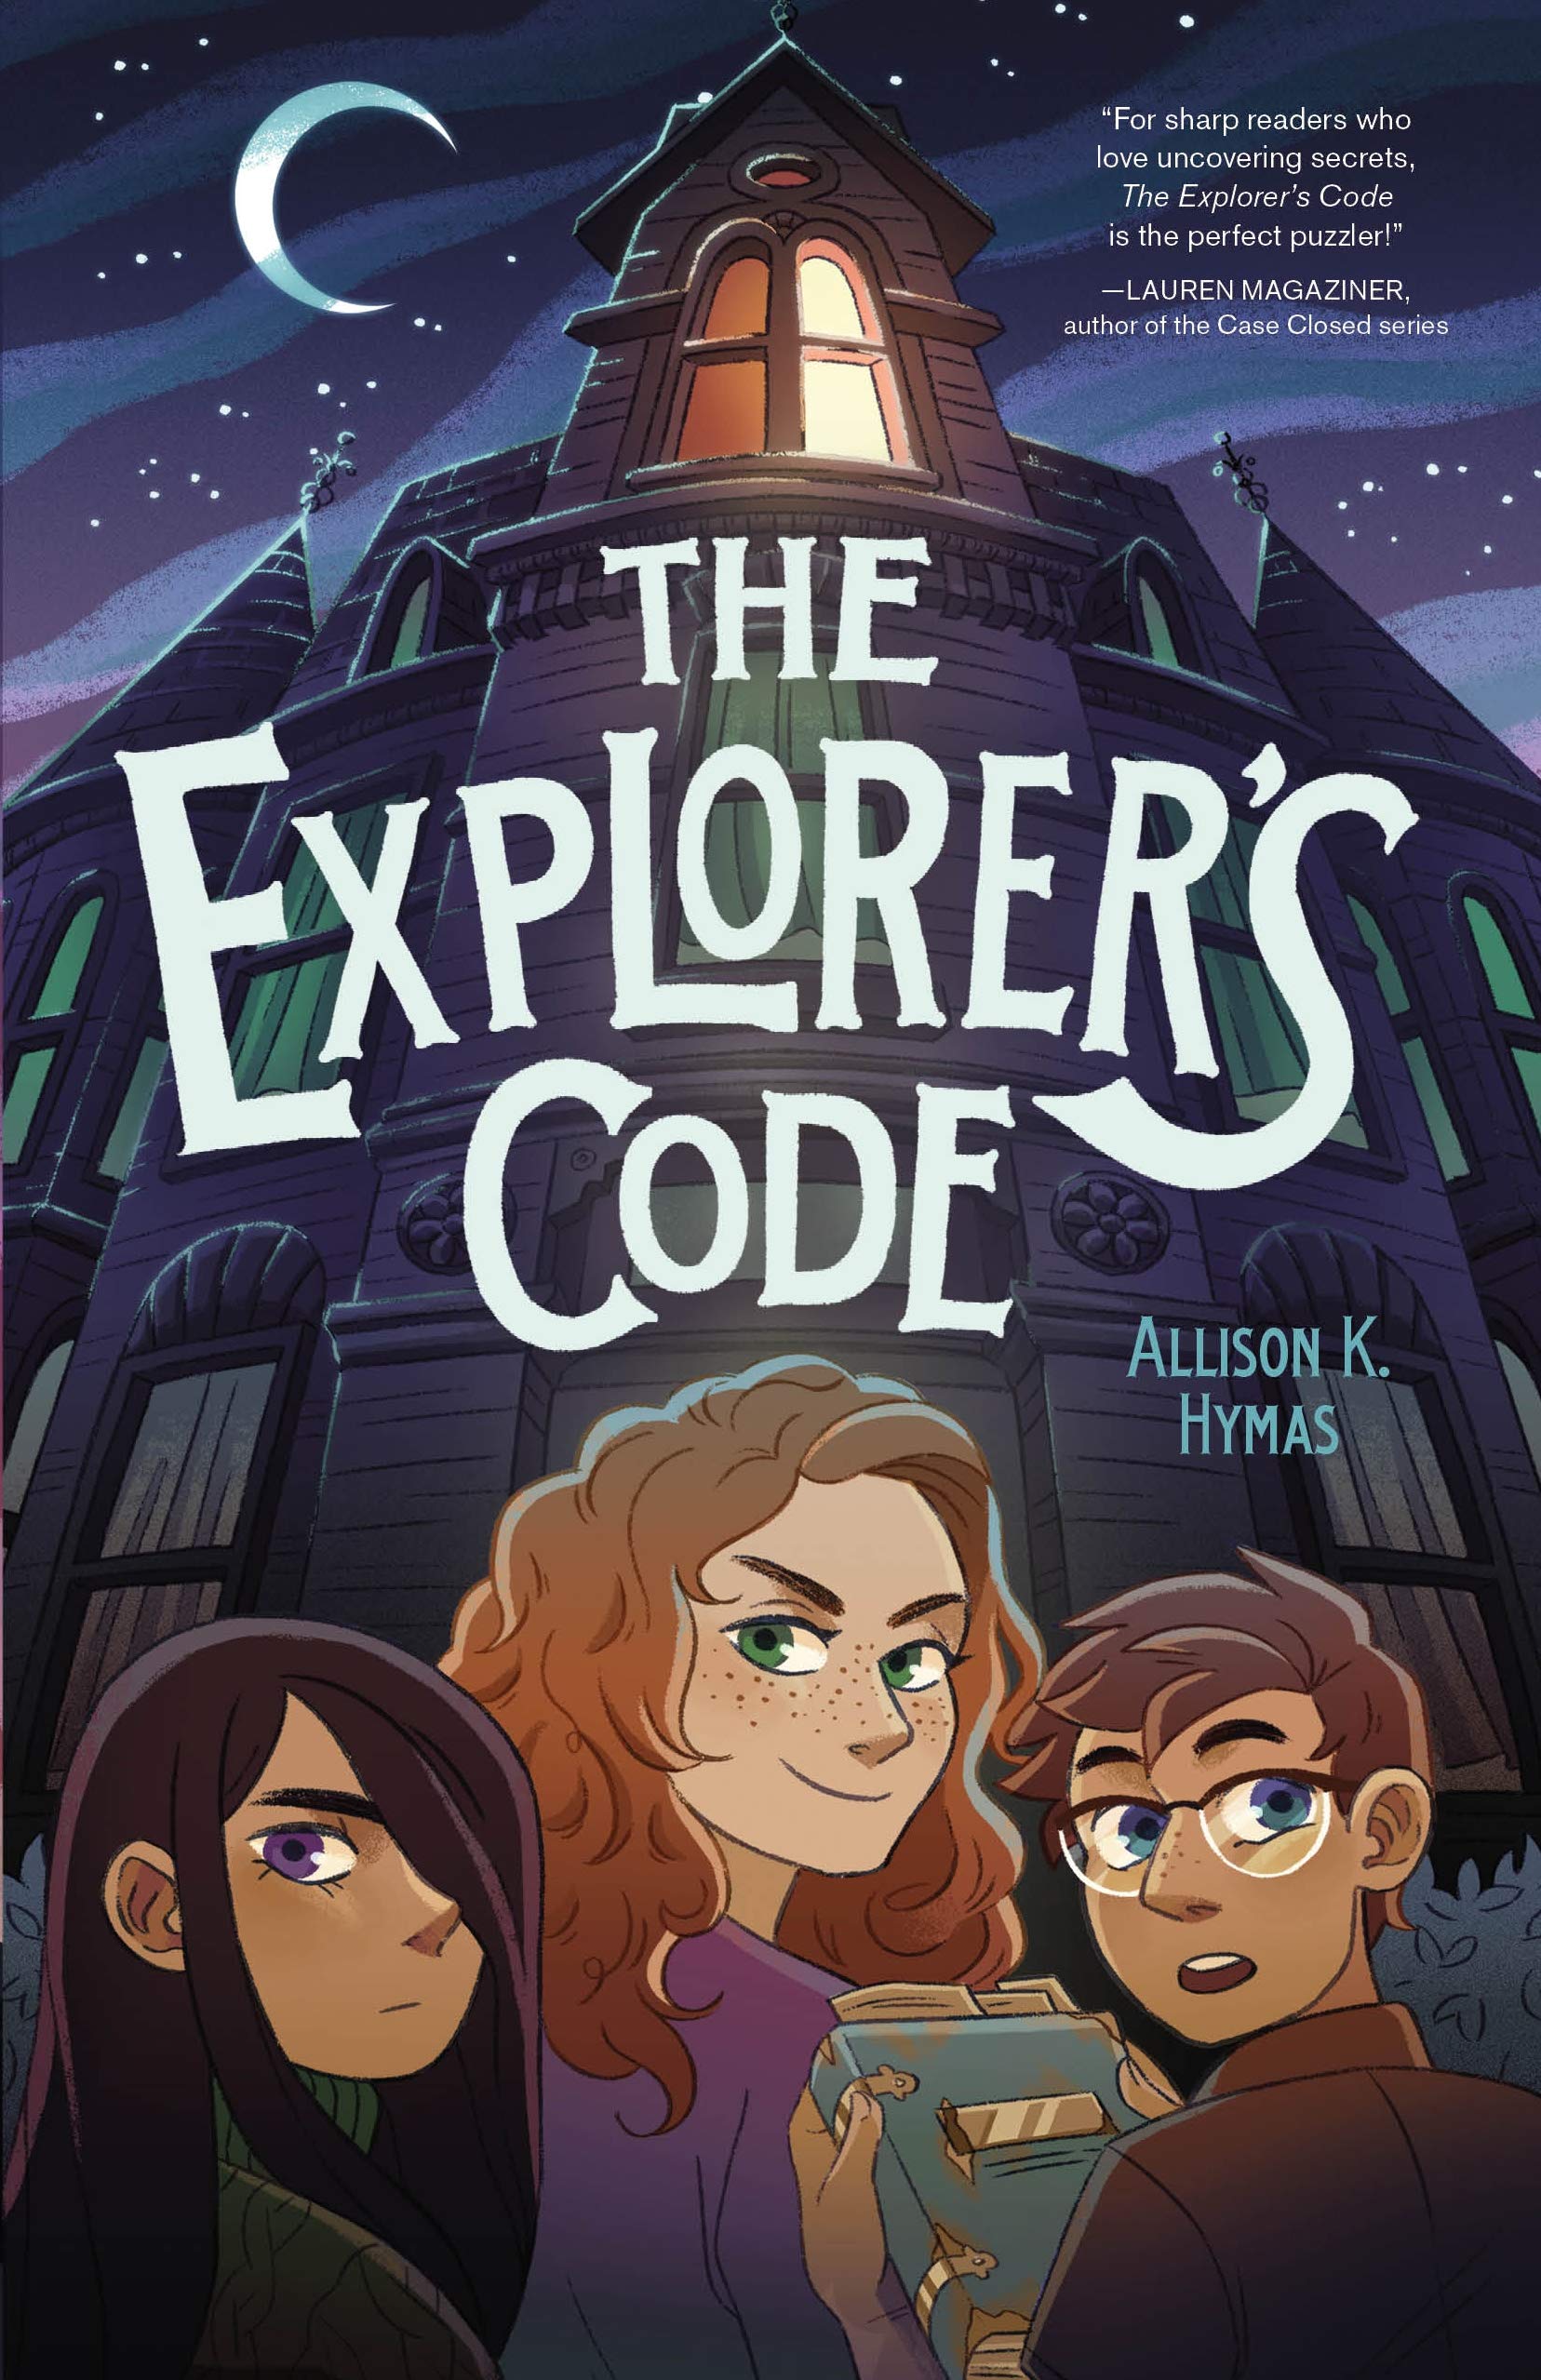 Image for "The Explorer's Code"